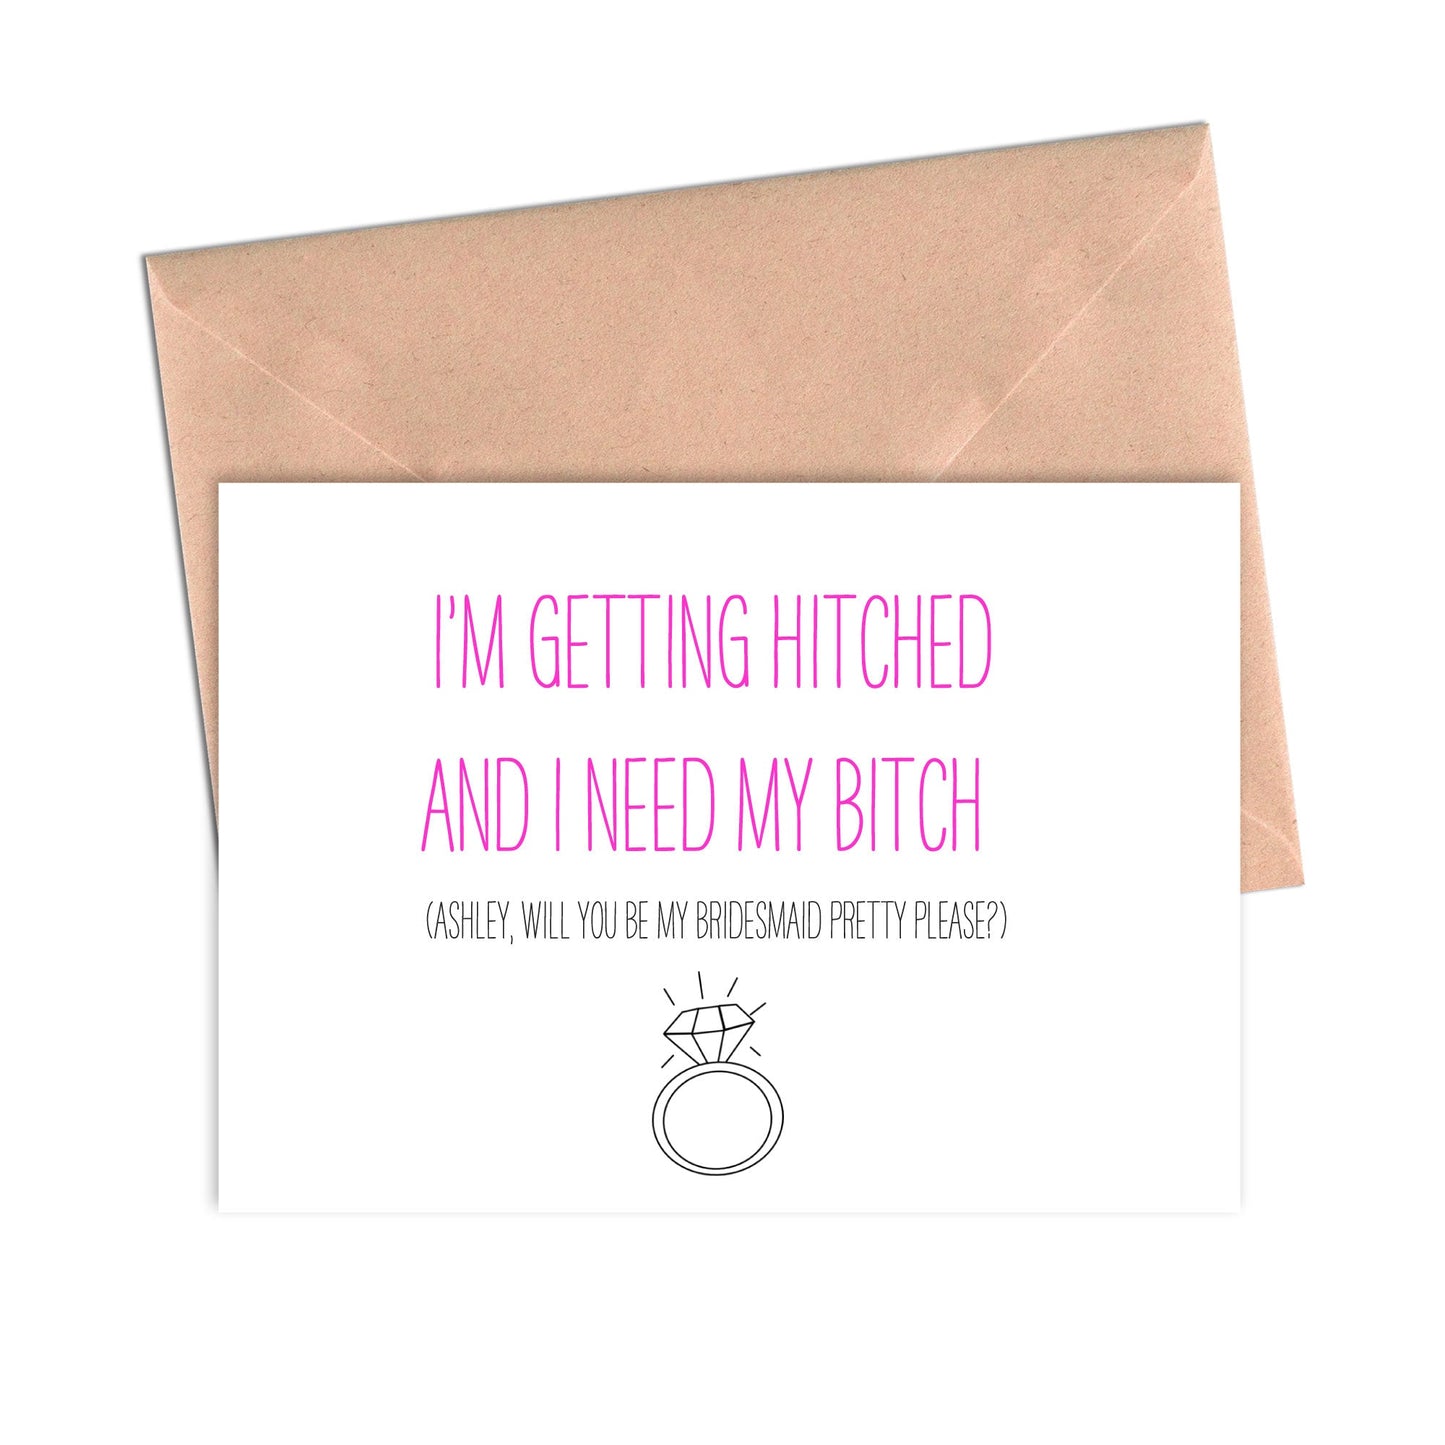 Load image into Gallery viewer, Getting Hitched and Need My Bitch Bridesmaid Proposal Funny Card-Bridesmaid Groomsmen Cards-Crimson and Clover Studio
